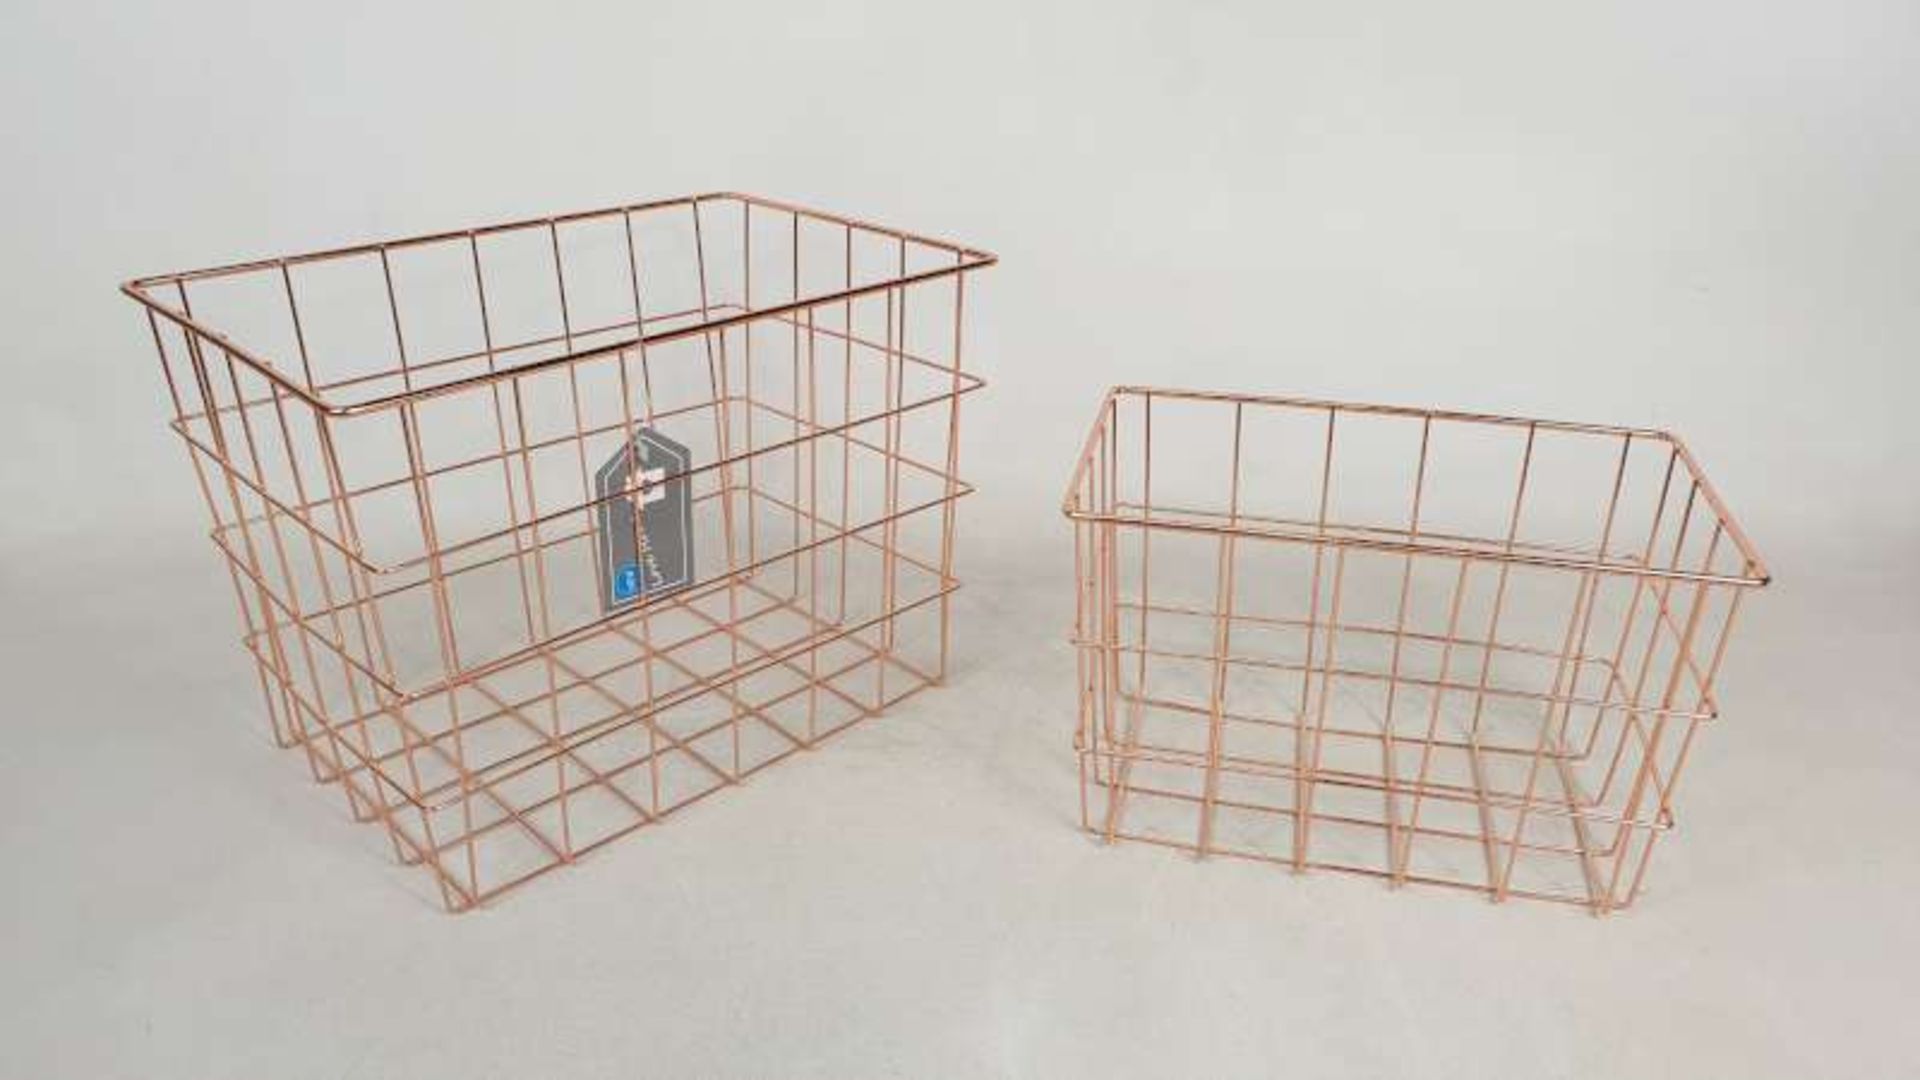 20 X BRAND NEW BOXED SETS OF 2 METAL COPPER BASKETS IN 5 BOXES RRP £14.99 EACH